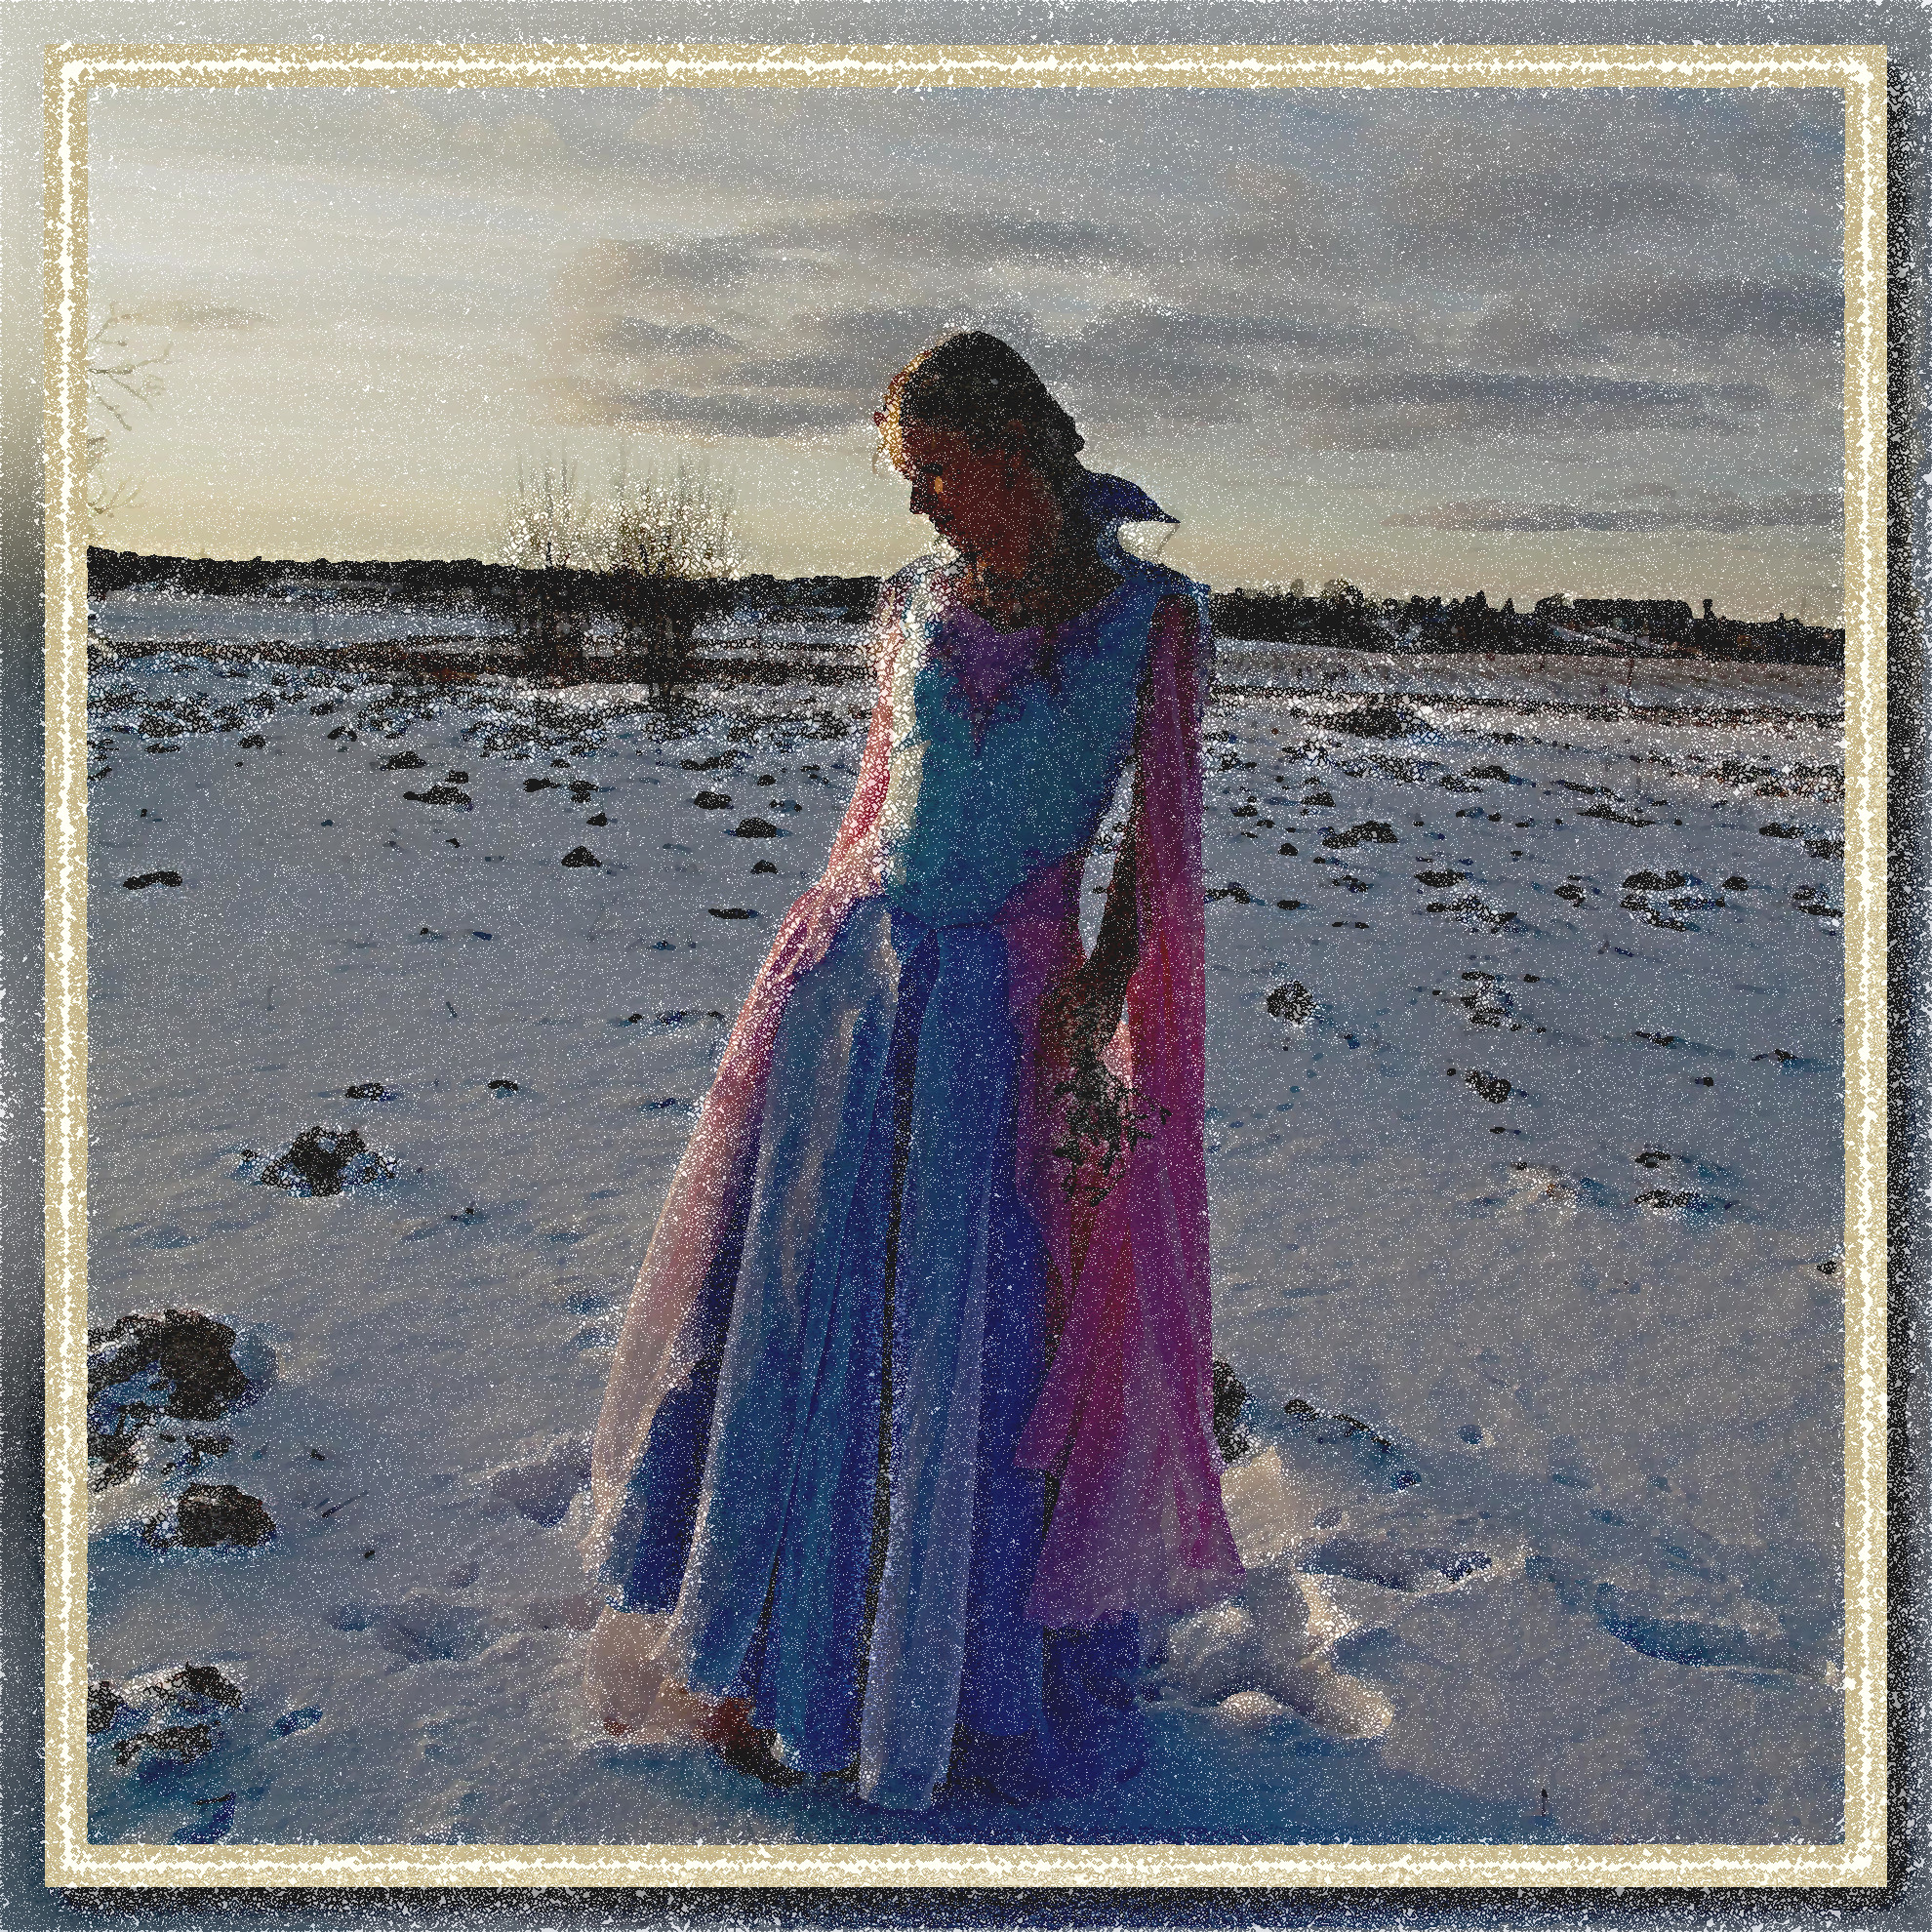 2023-05-28 09-04-54costume__winter_morning__by_aquilina108_dbl29j5-fullview_portrait with a framed Artistic effect, style Squiggly.jpg